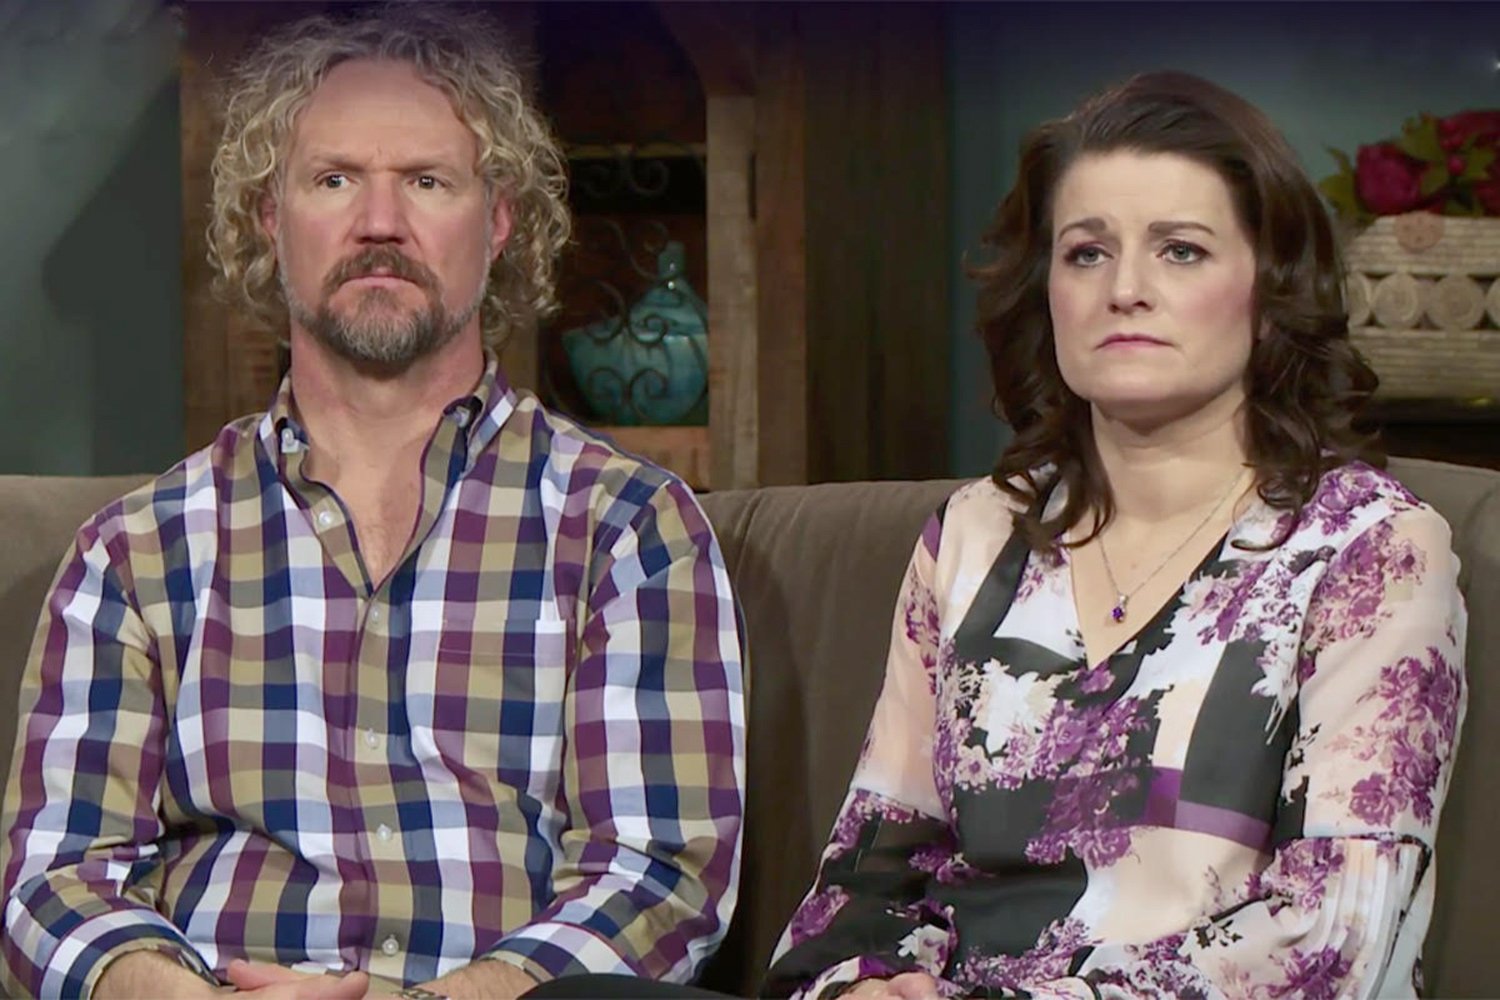 Kody Brown and Robyn Brown sit together in a confessional for ‘Sister Wives’ Season 16 on TLC.